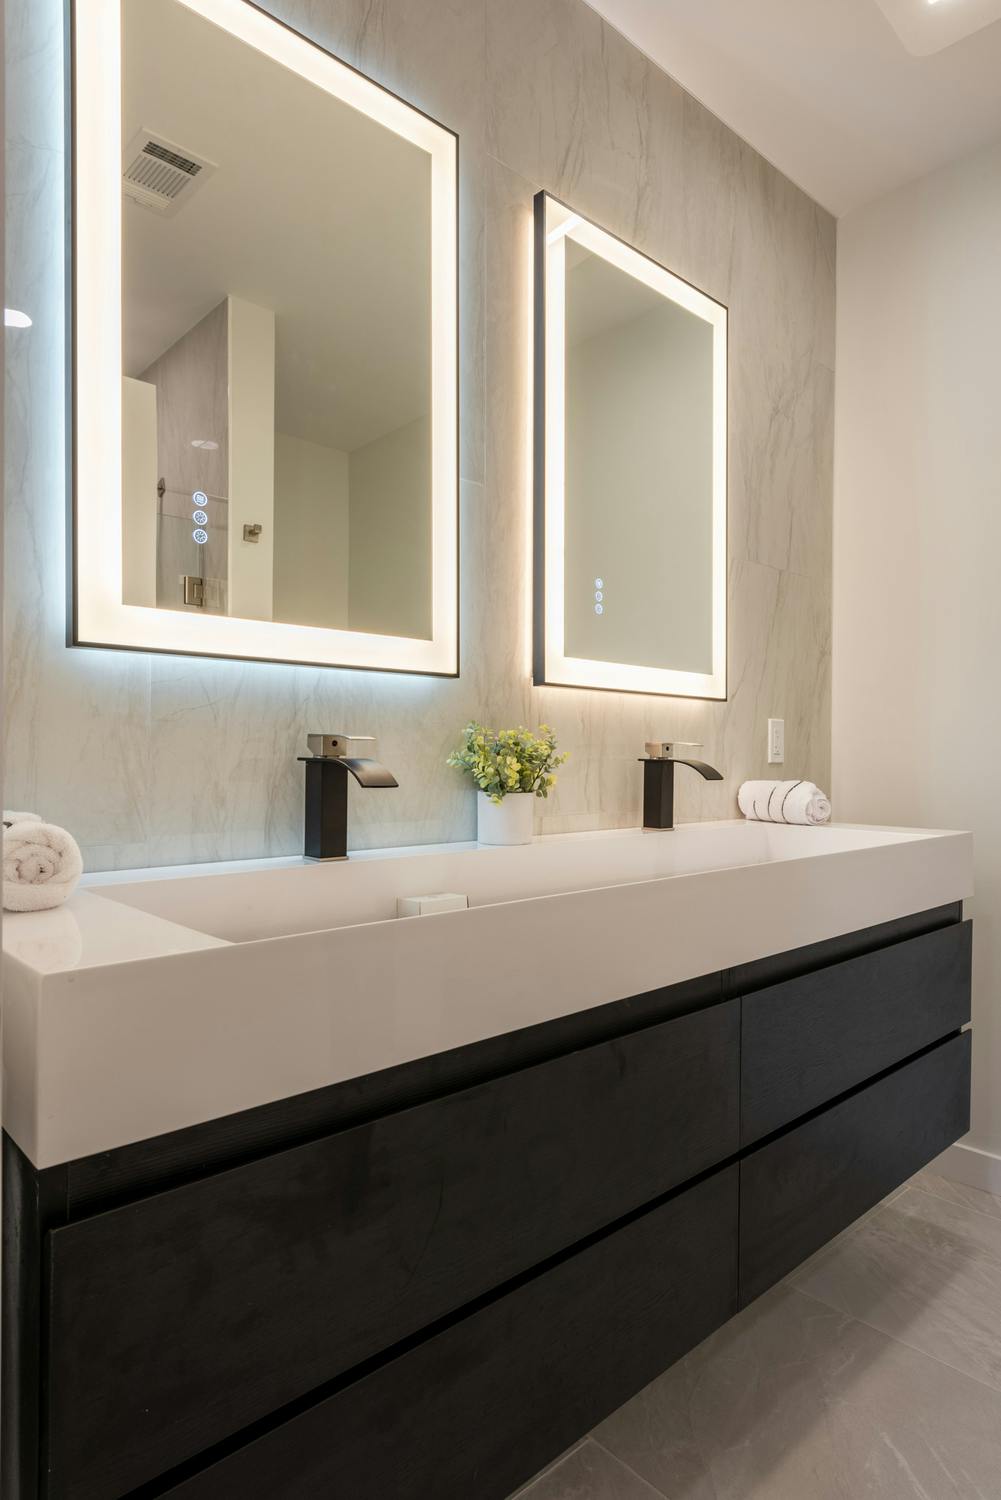 Bathroom with two sinks, two mirrors and cabnets